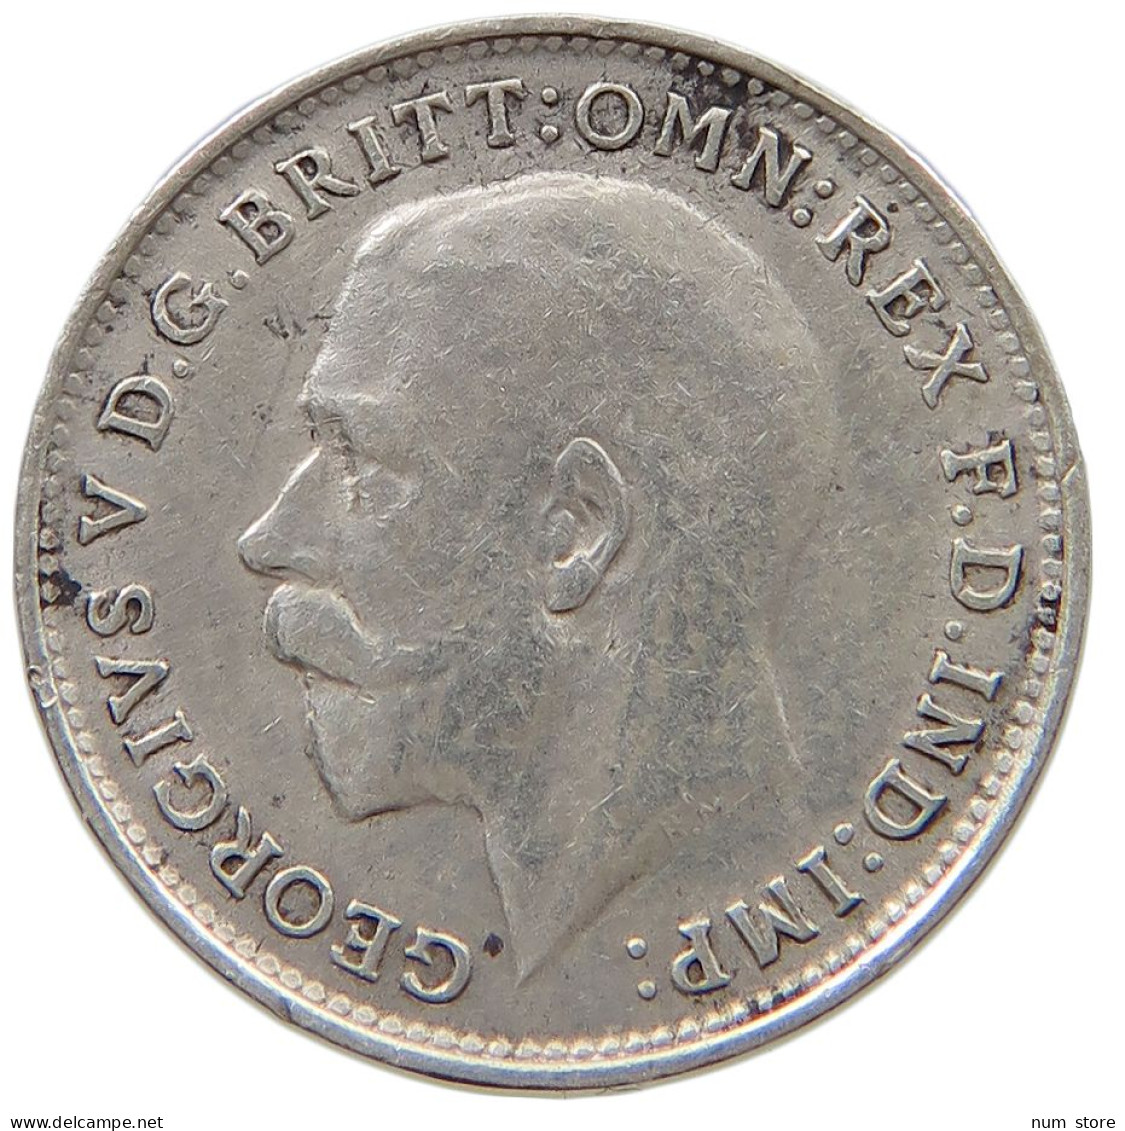 GREAT BRITAIN THREEPENCE 1917 George V. (1910-1936) #a082 0635 - F. 3 Pence